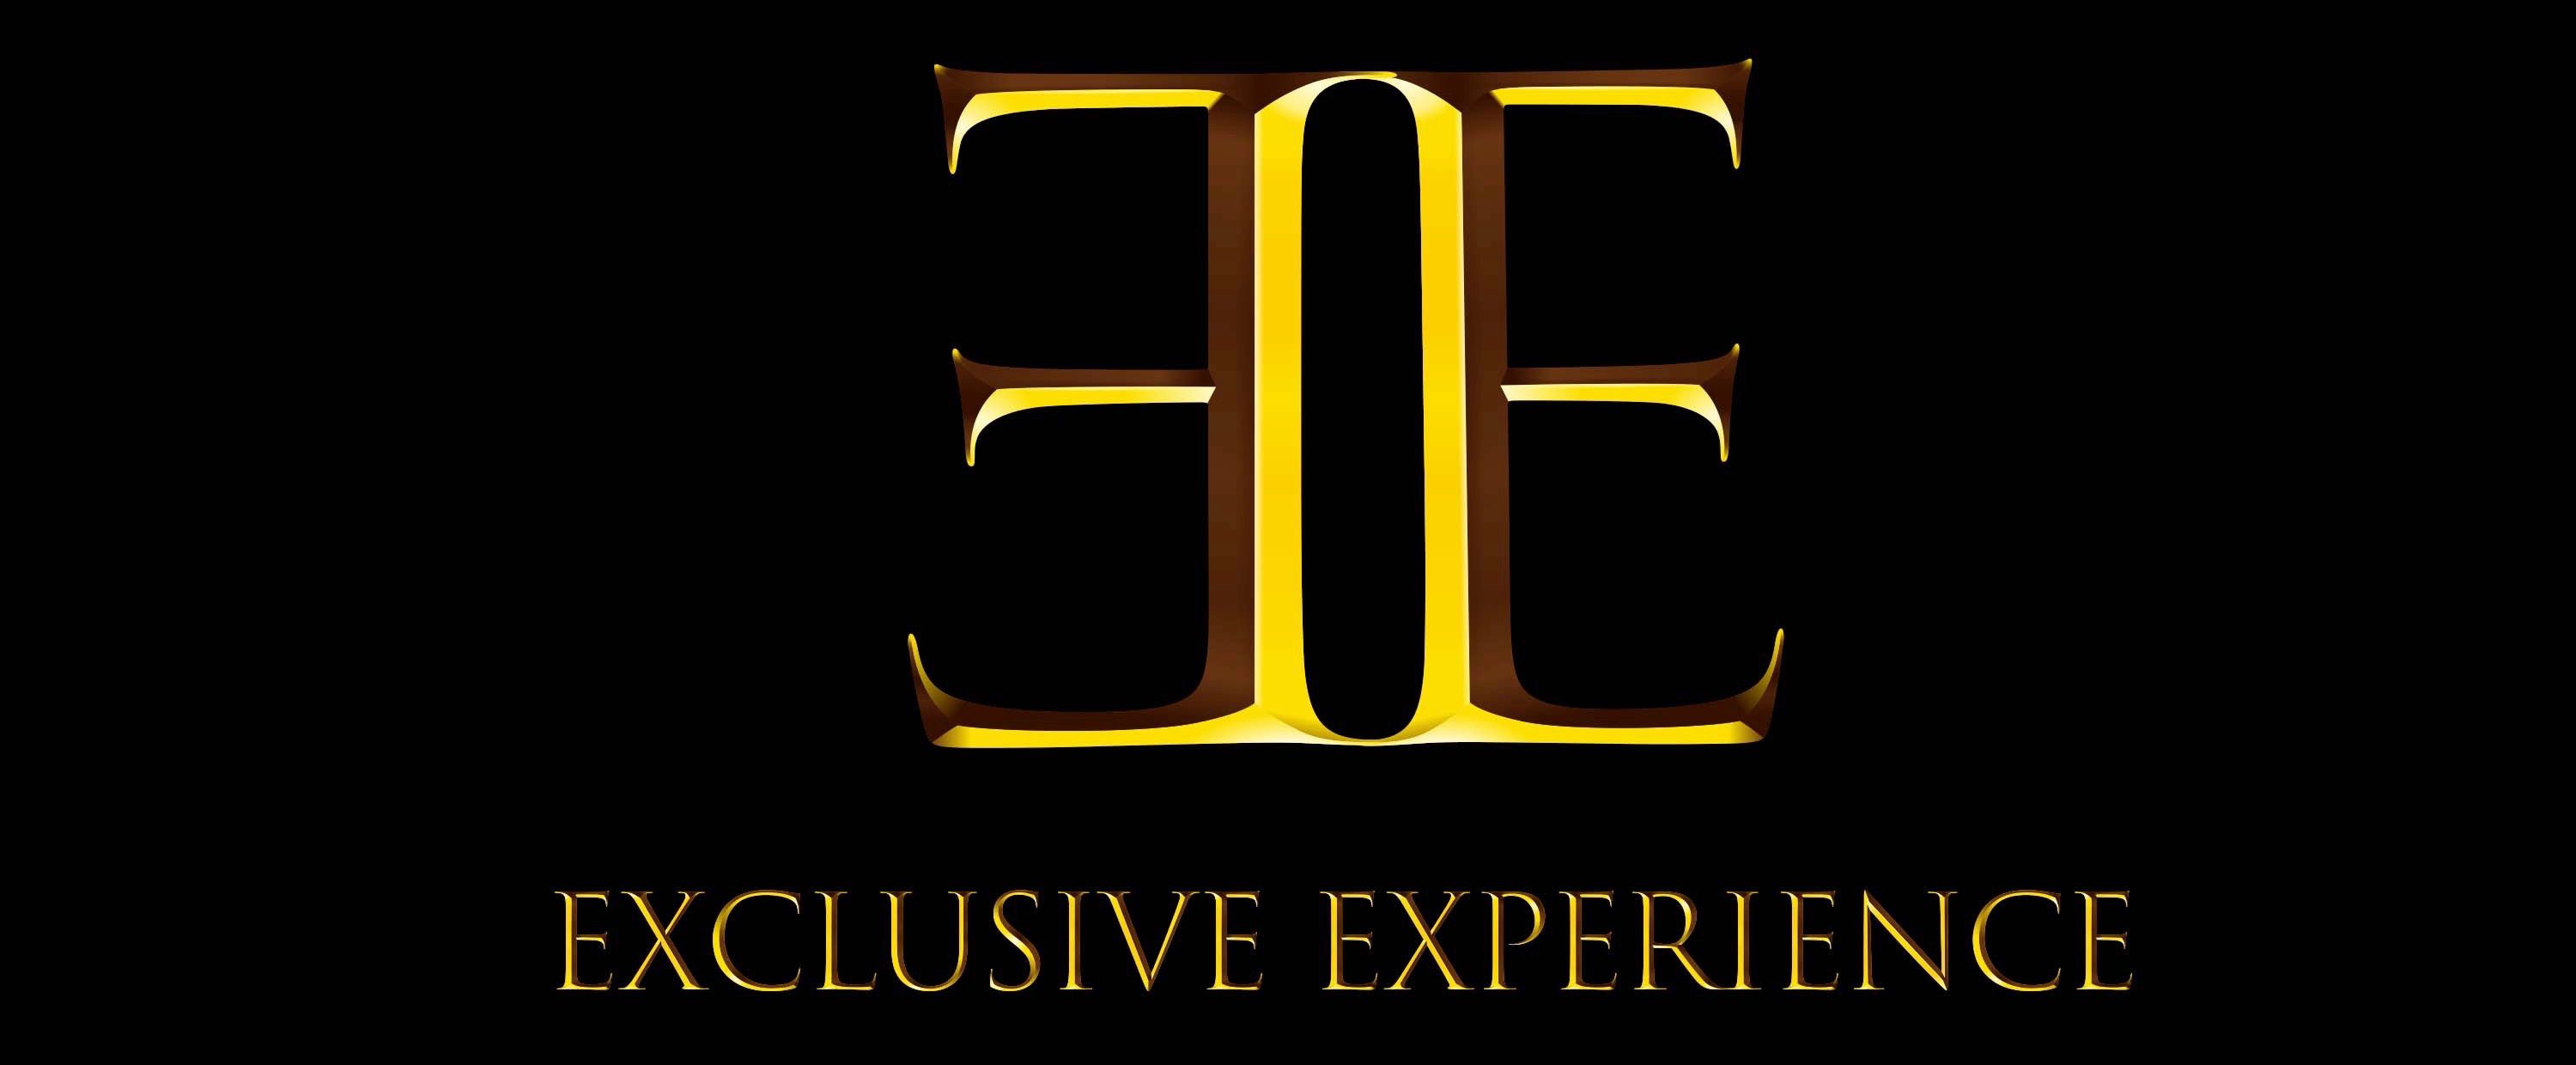 Exclusive Experience Company